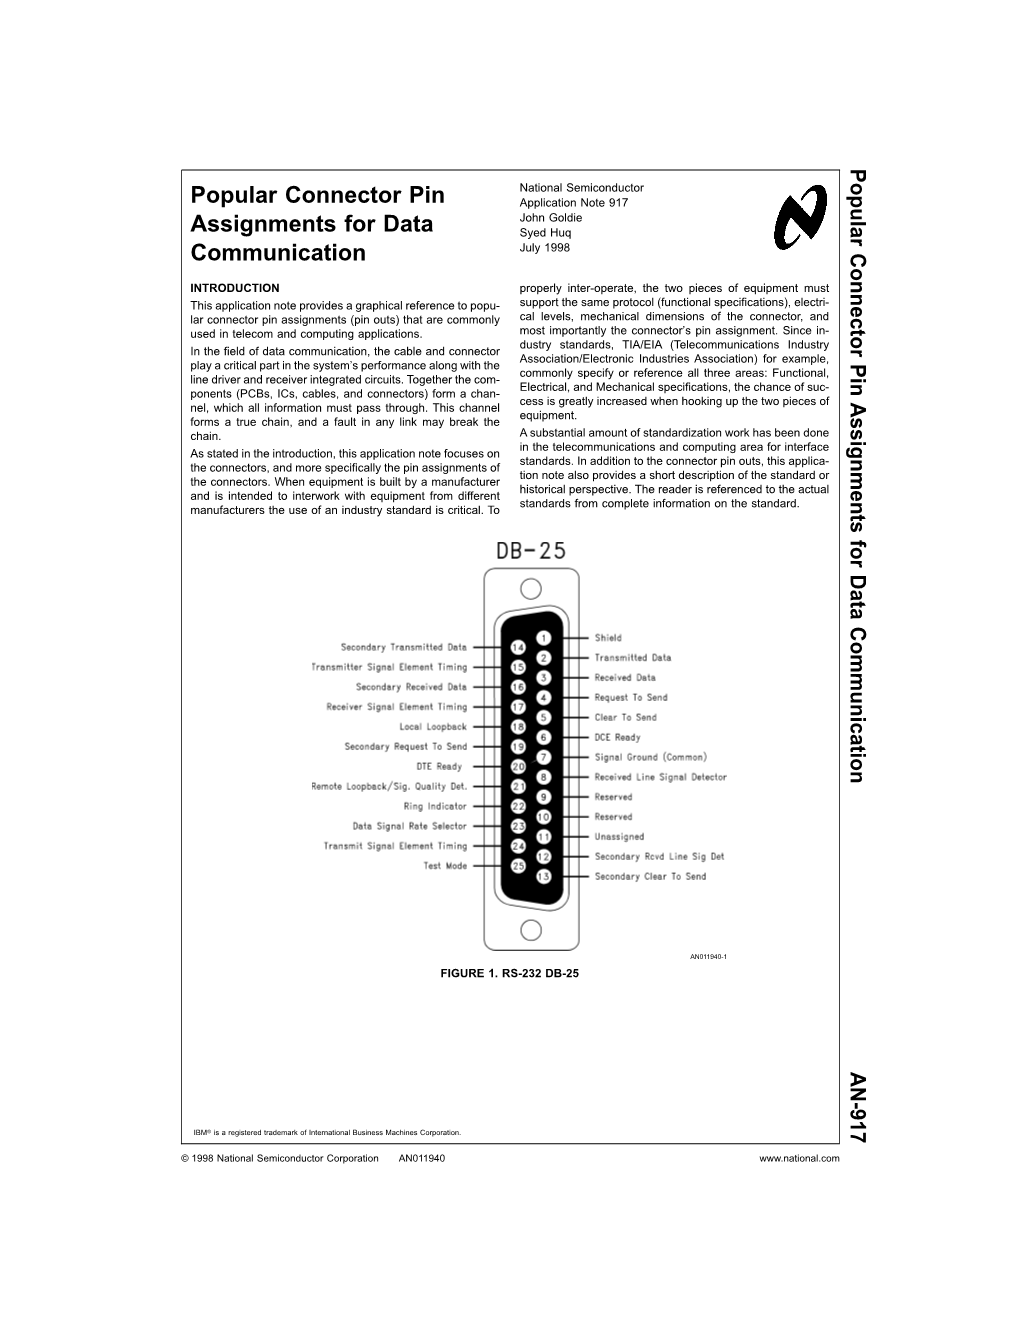 Application Note 917 Popular Connector Pin Assignments For